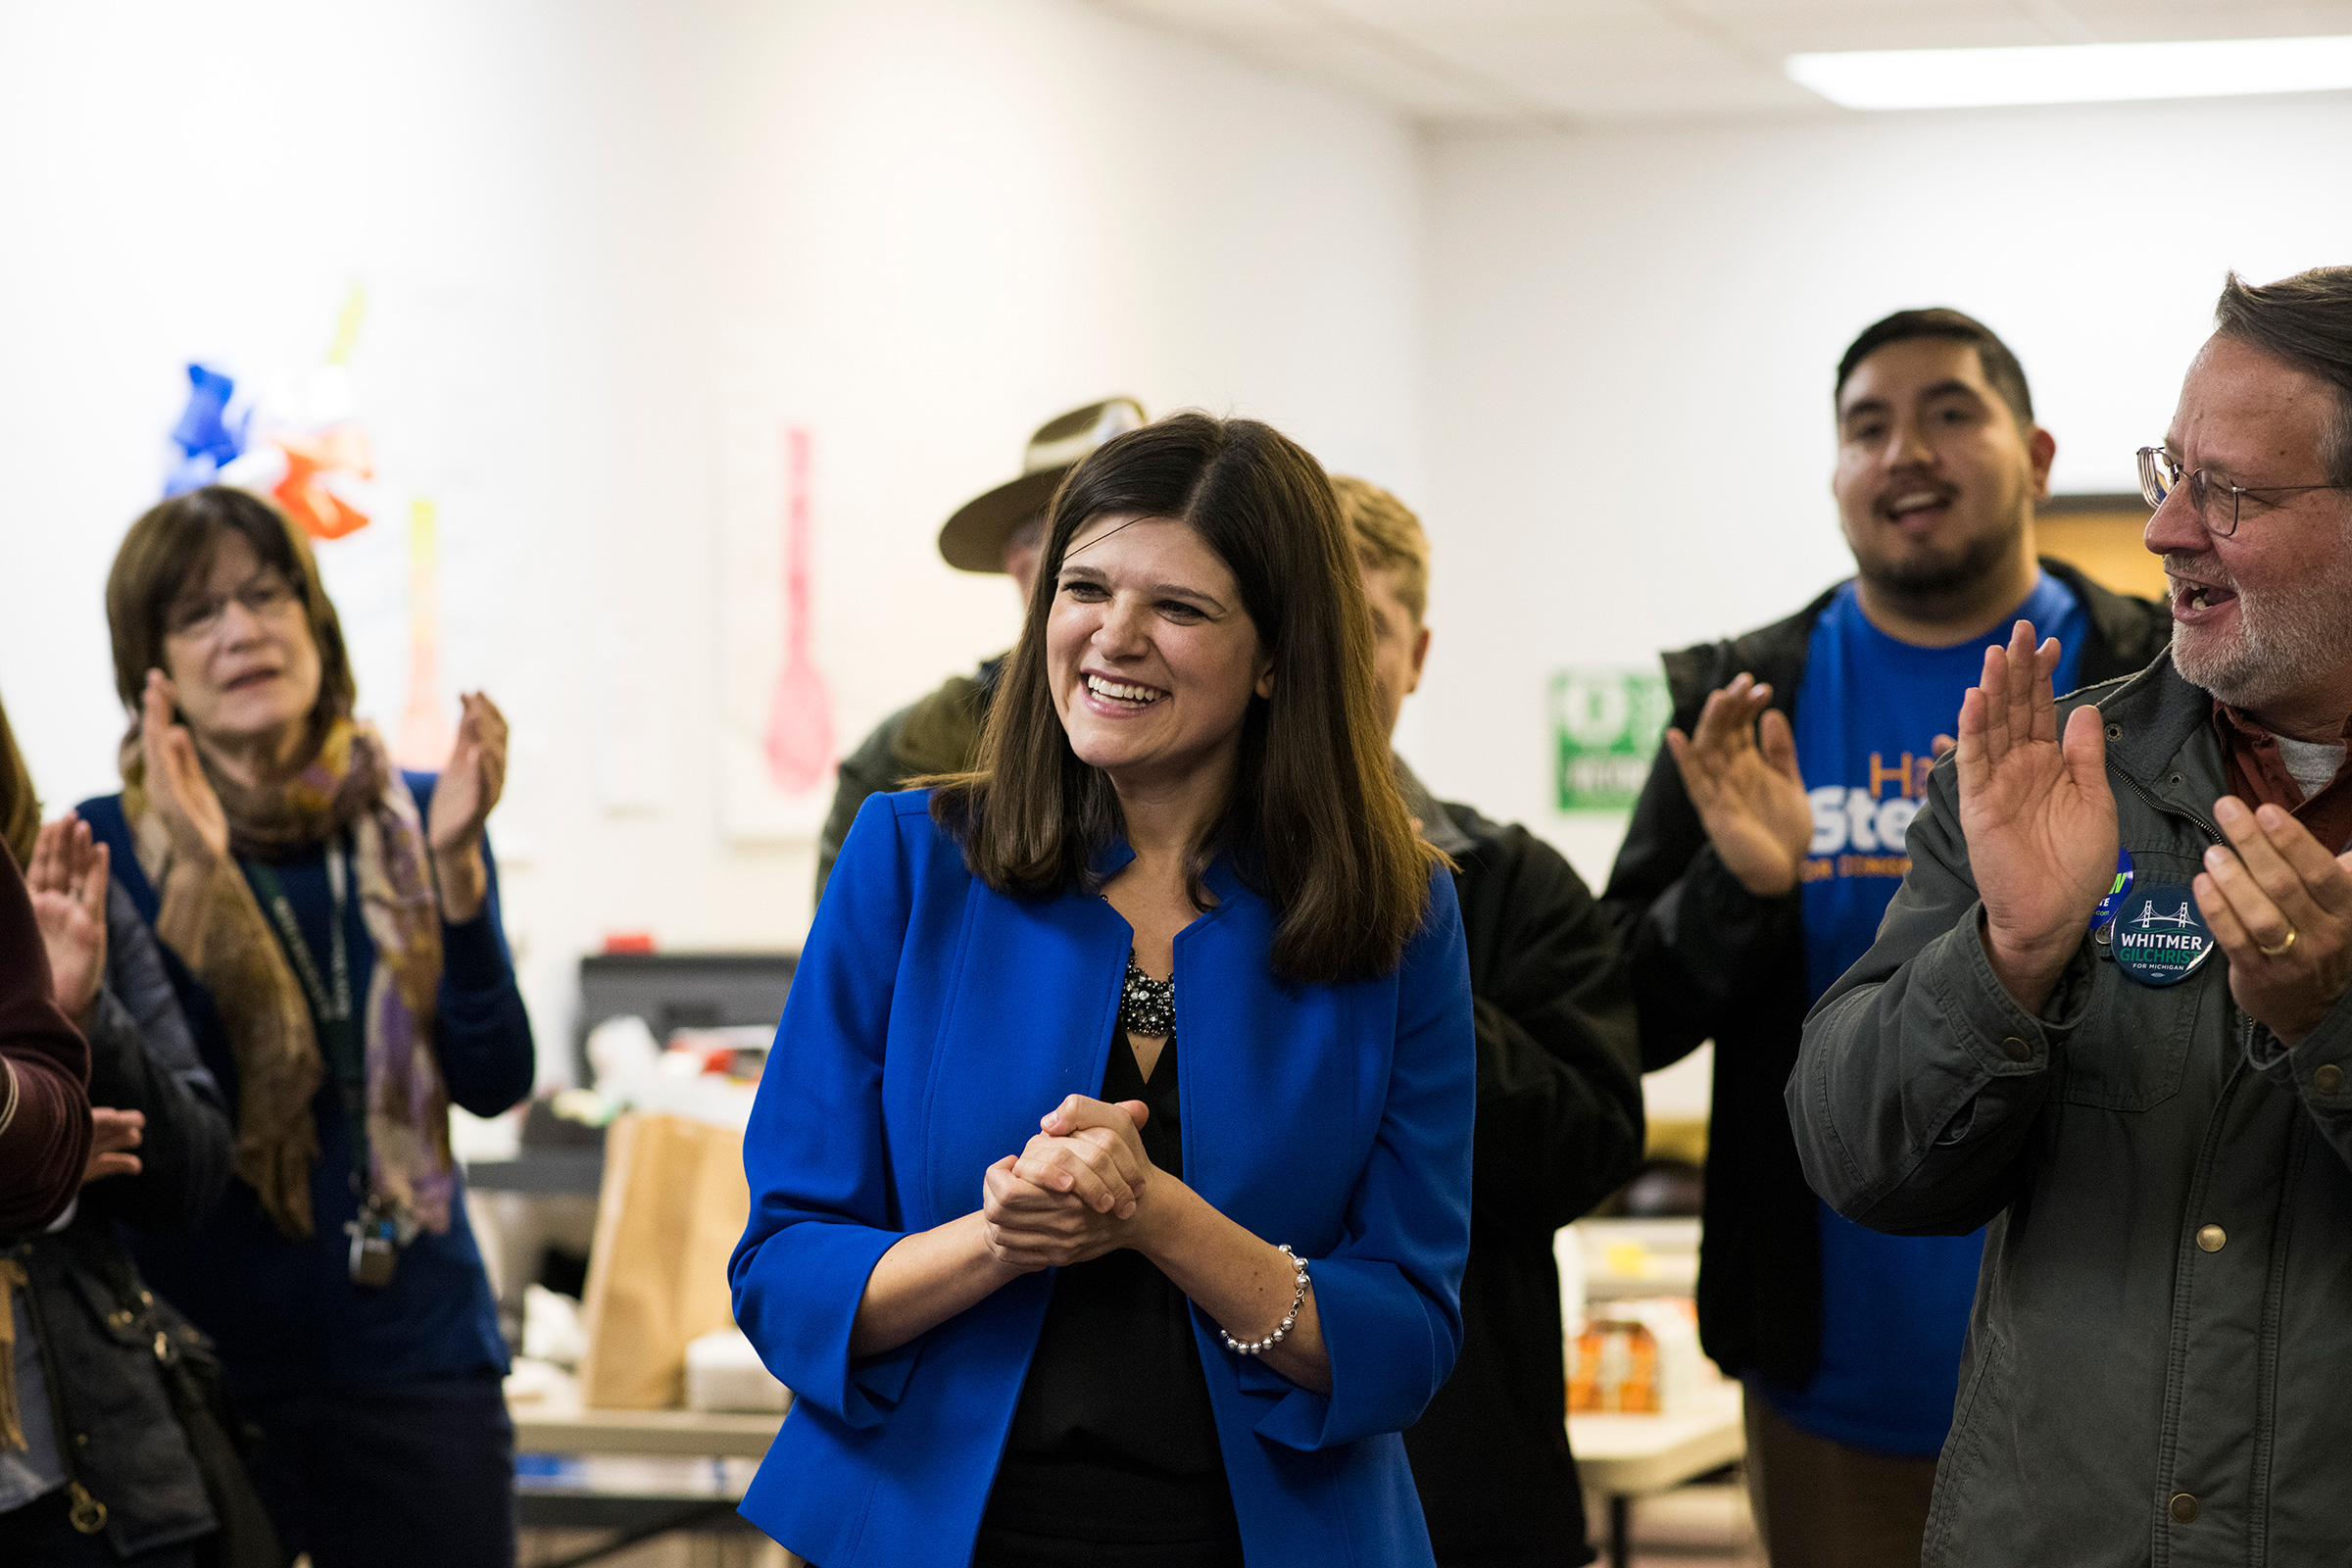 Stevens campaigns in her Michigan district during her 2018 congressional run